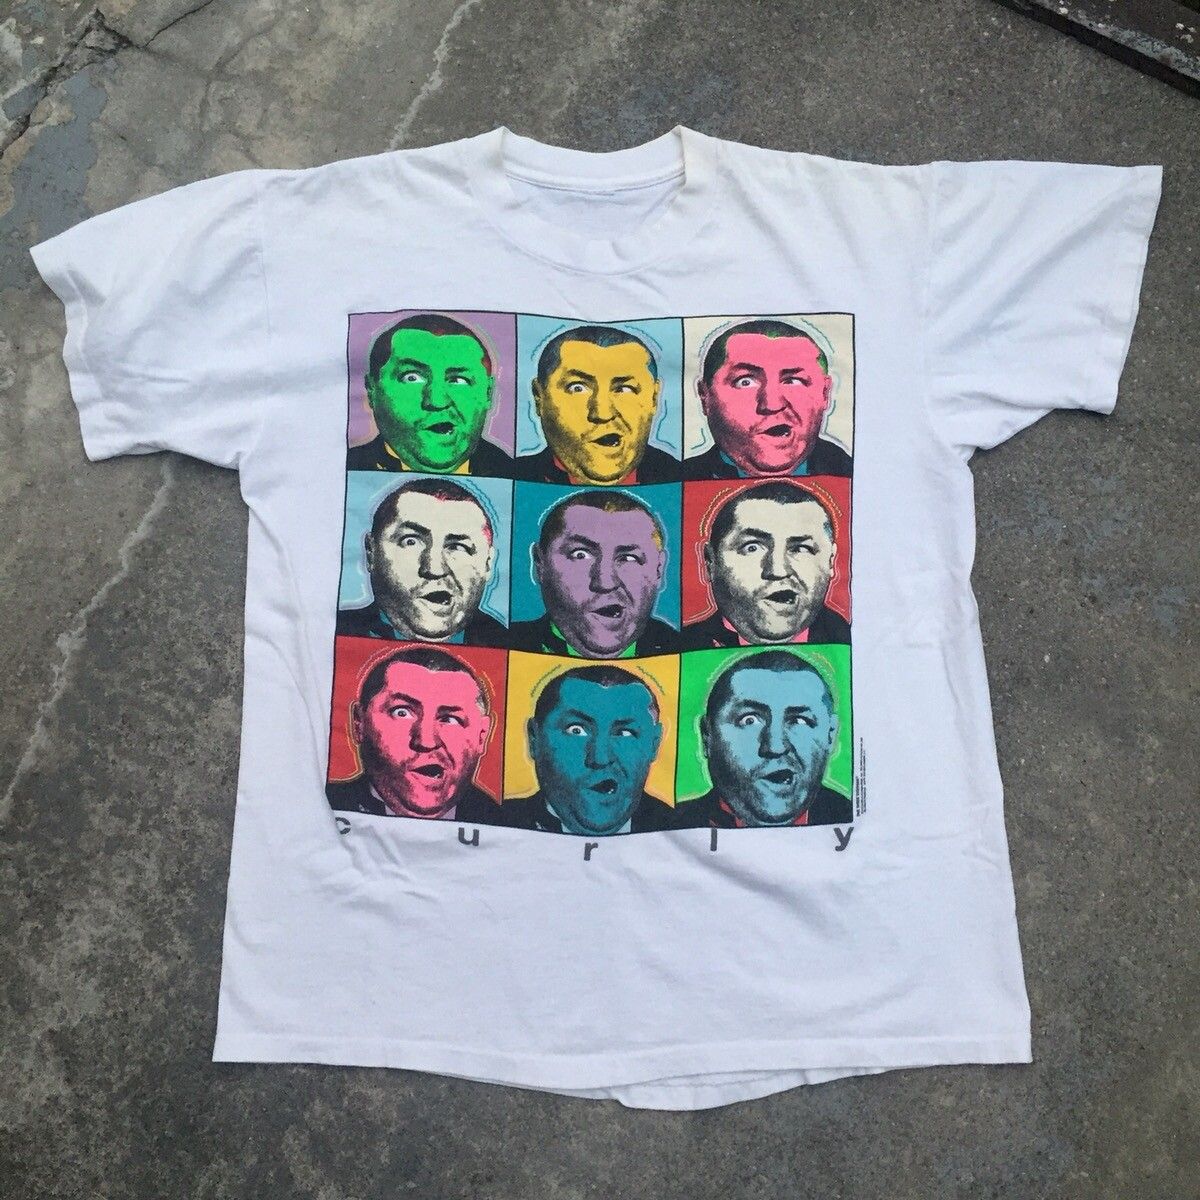 Vintage Vintage 1990 Andy Warhol Inspired Three Stooges Tee Shirt Size US L / EU 52-54 / 3 - 1 Preview